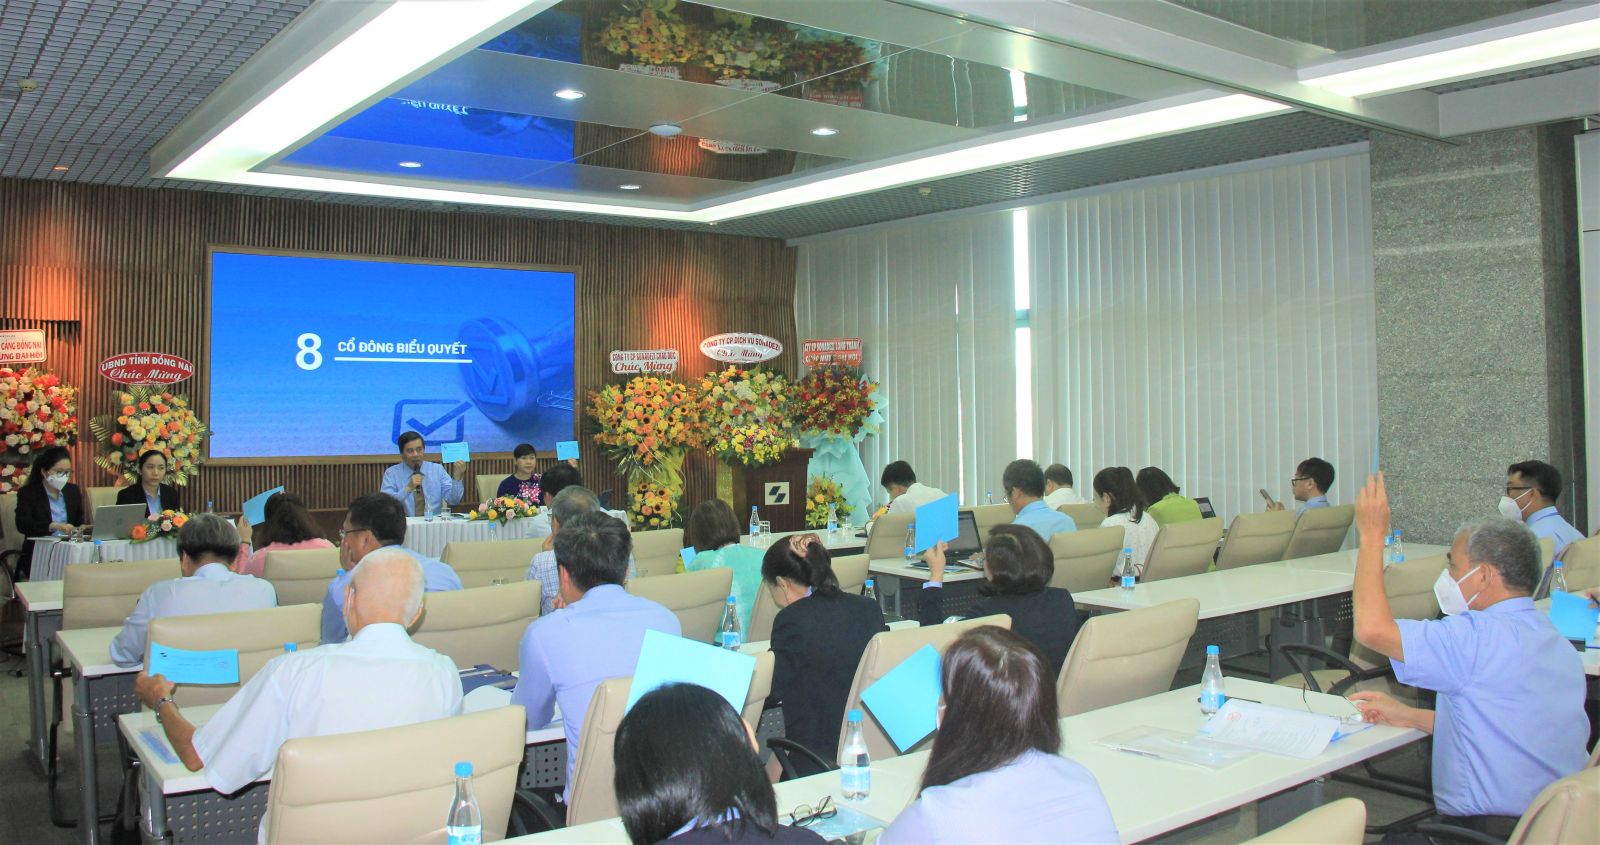 SNZ Annual General Meeting of Shareholders: Dividend in 2023 is estimated at 452 billion dong, research and investment for the new industrial park in Khanh Hoa province